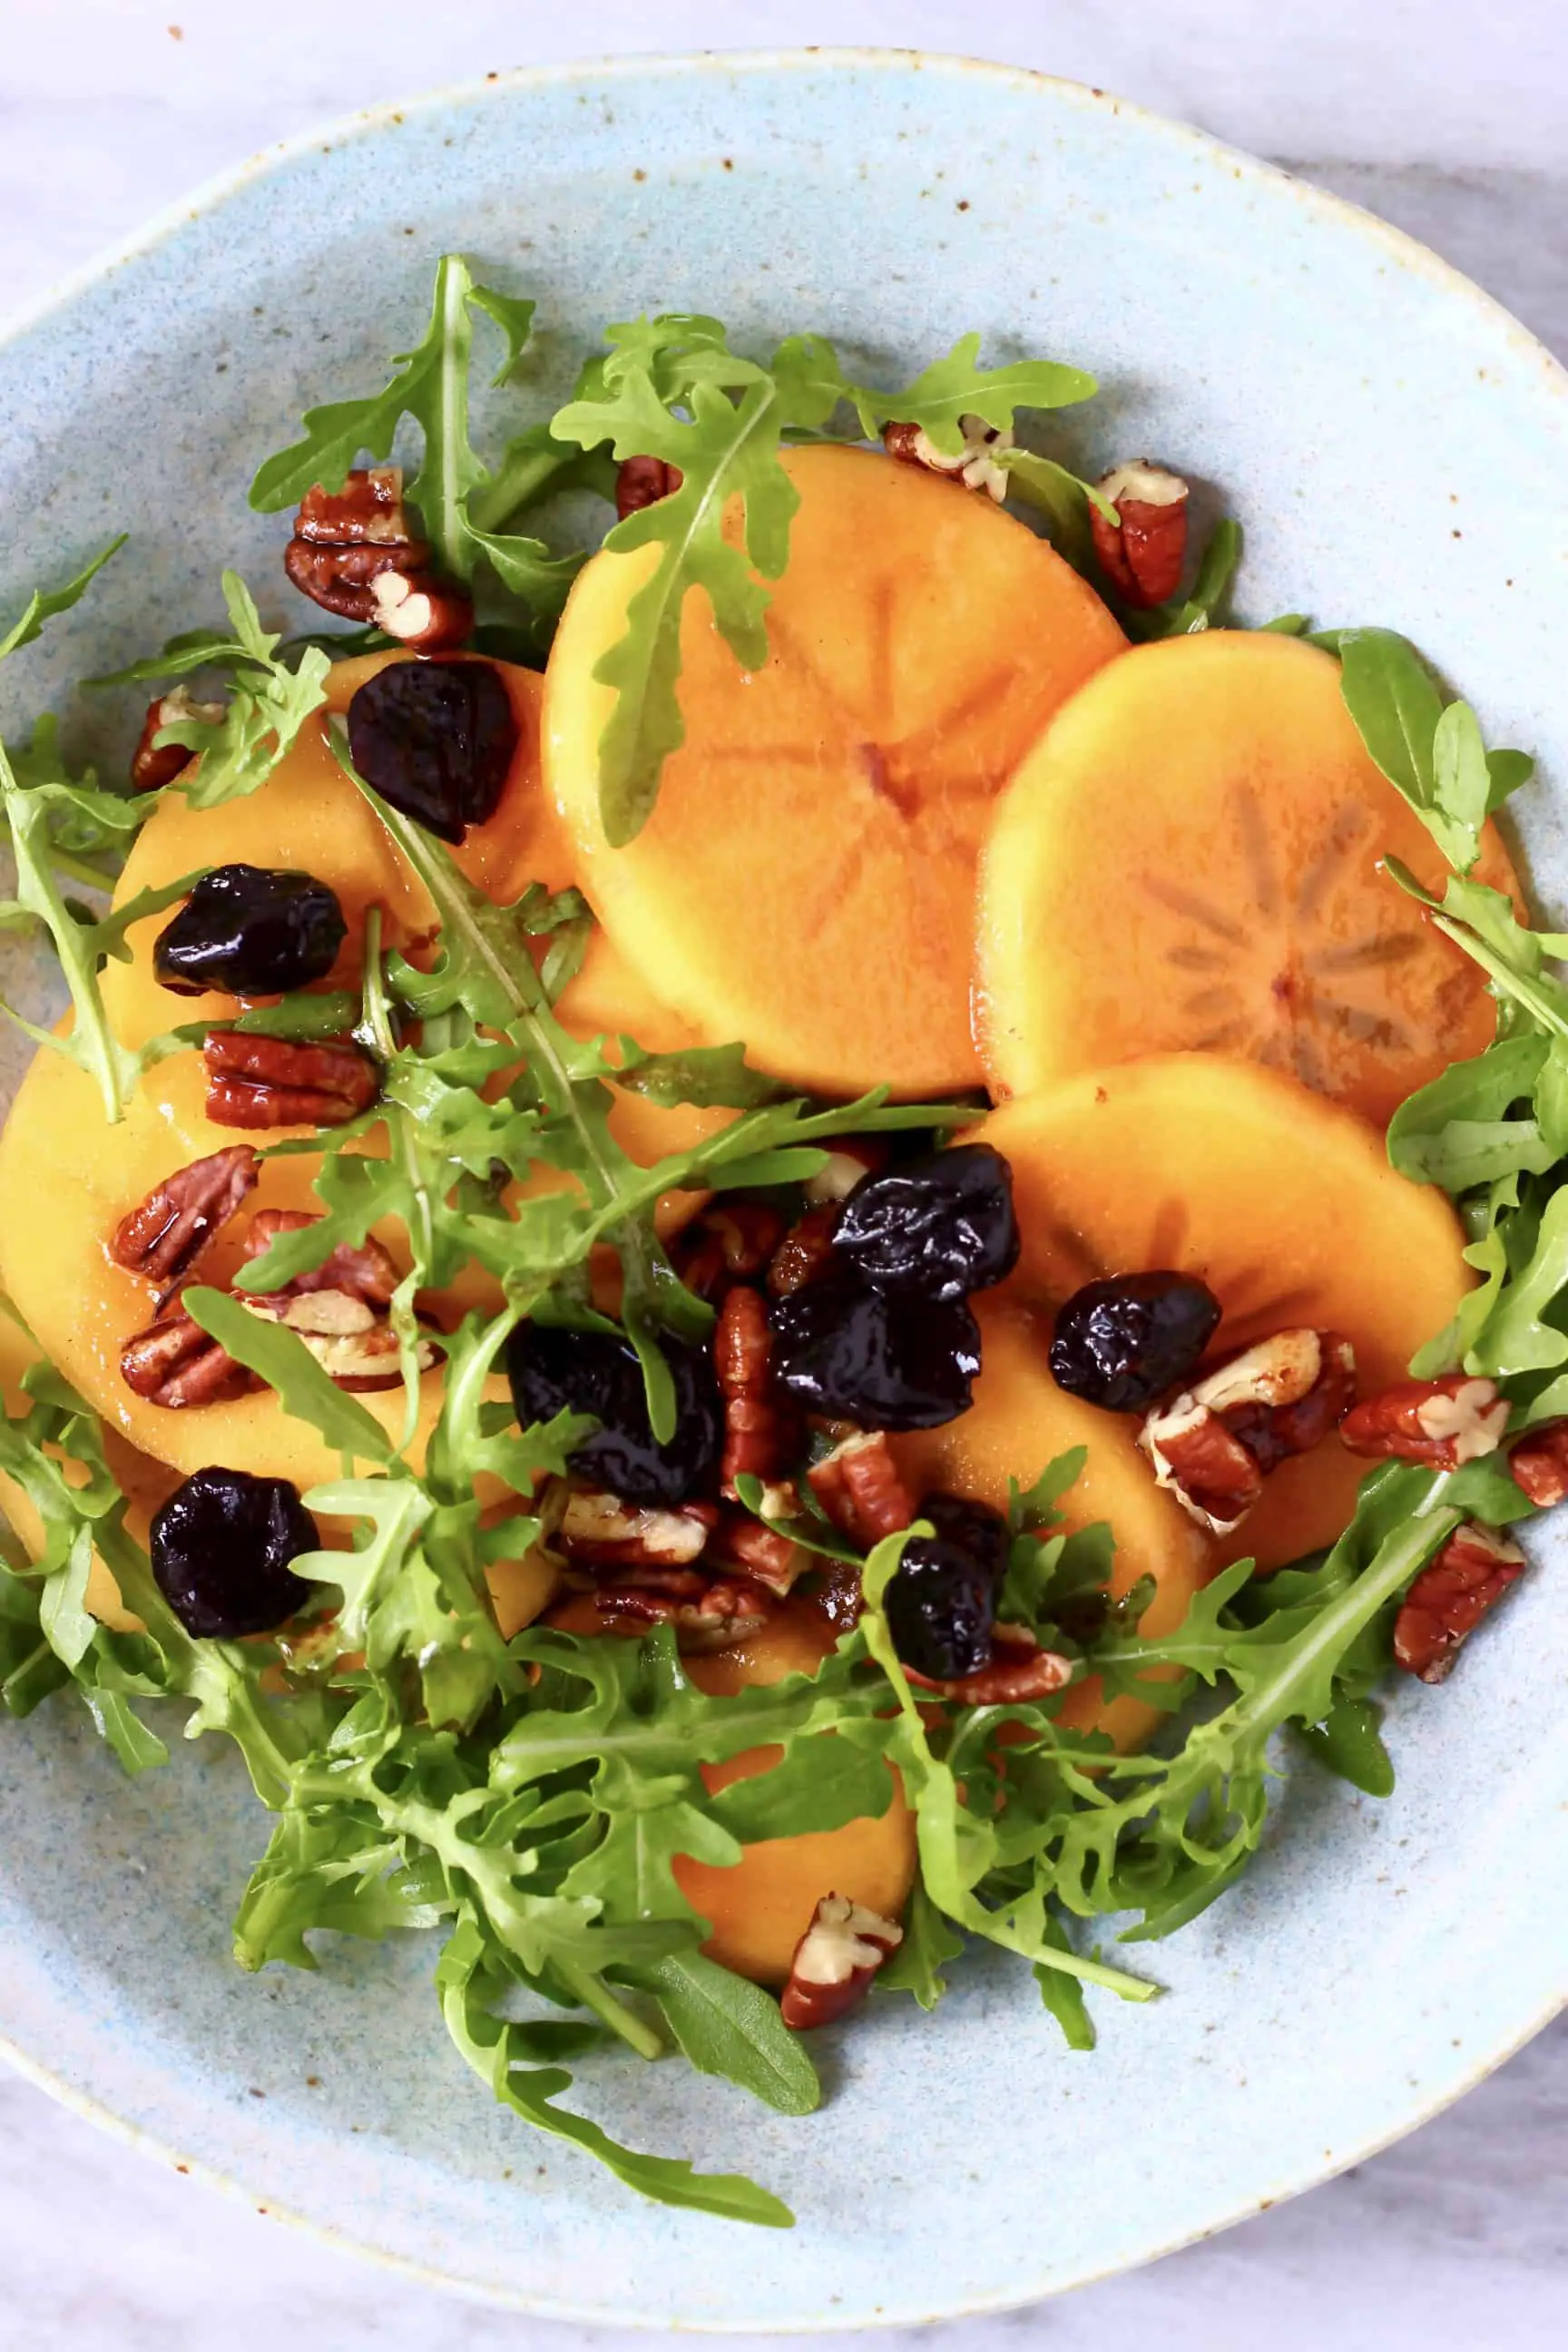 Persimmon salad in a blue bowl against a marble background